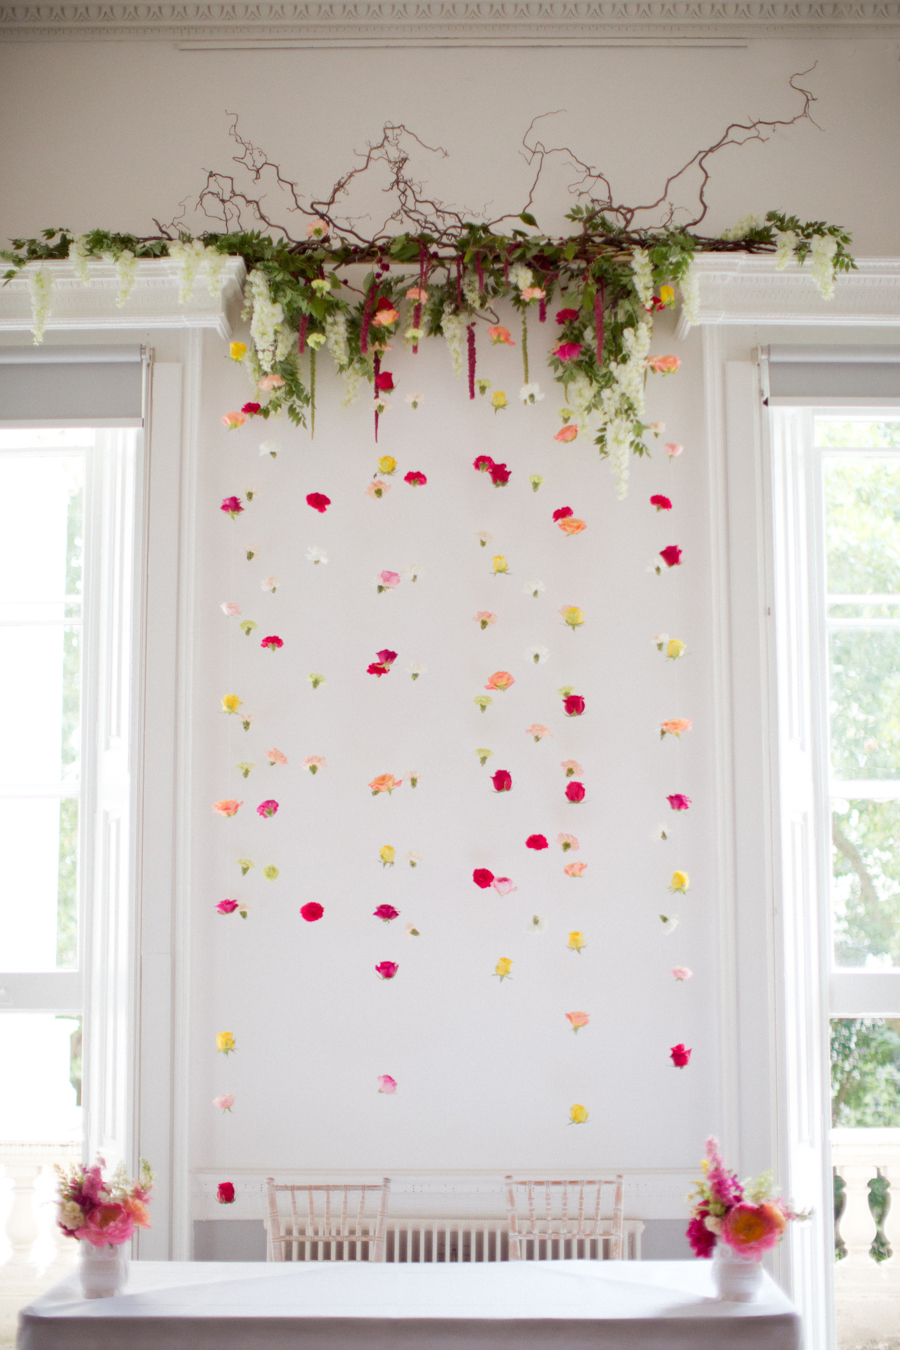 DIY Hanging Flowers Decor Perfect For Your Special Occasions - Page 2 of 3